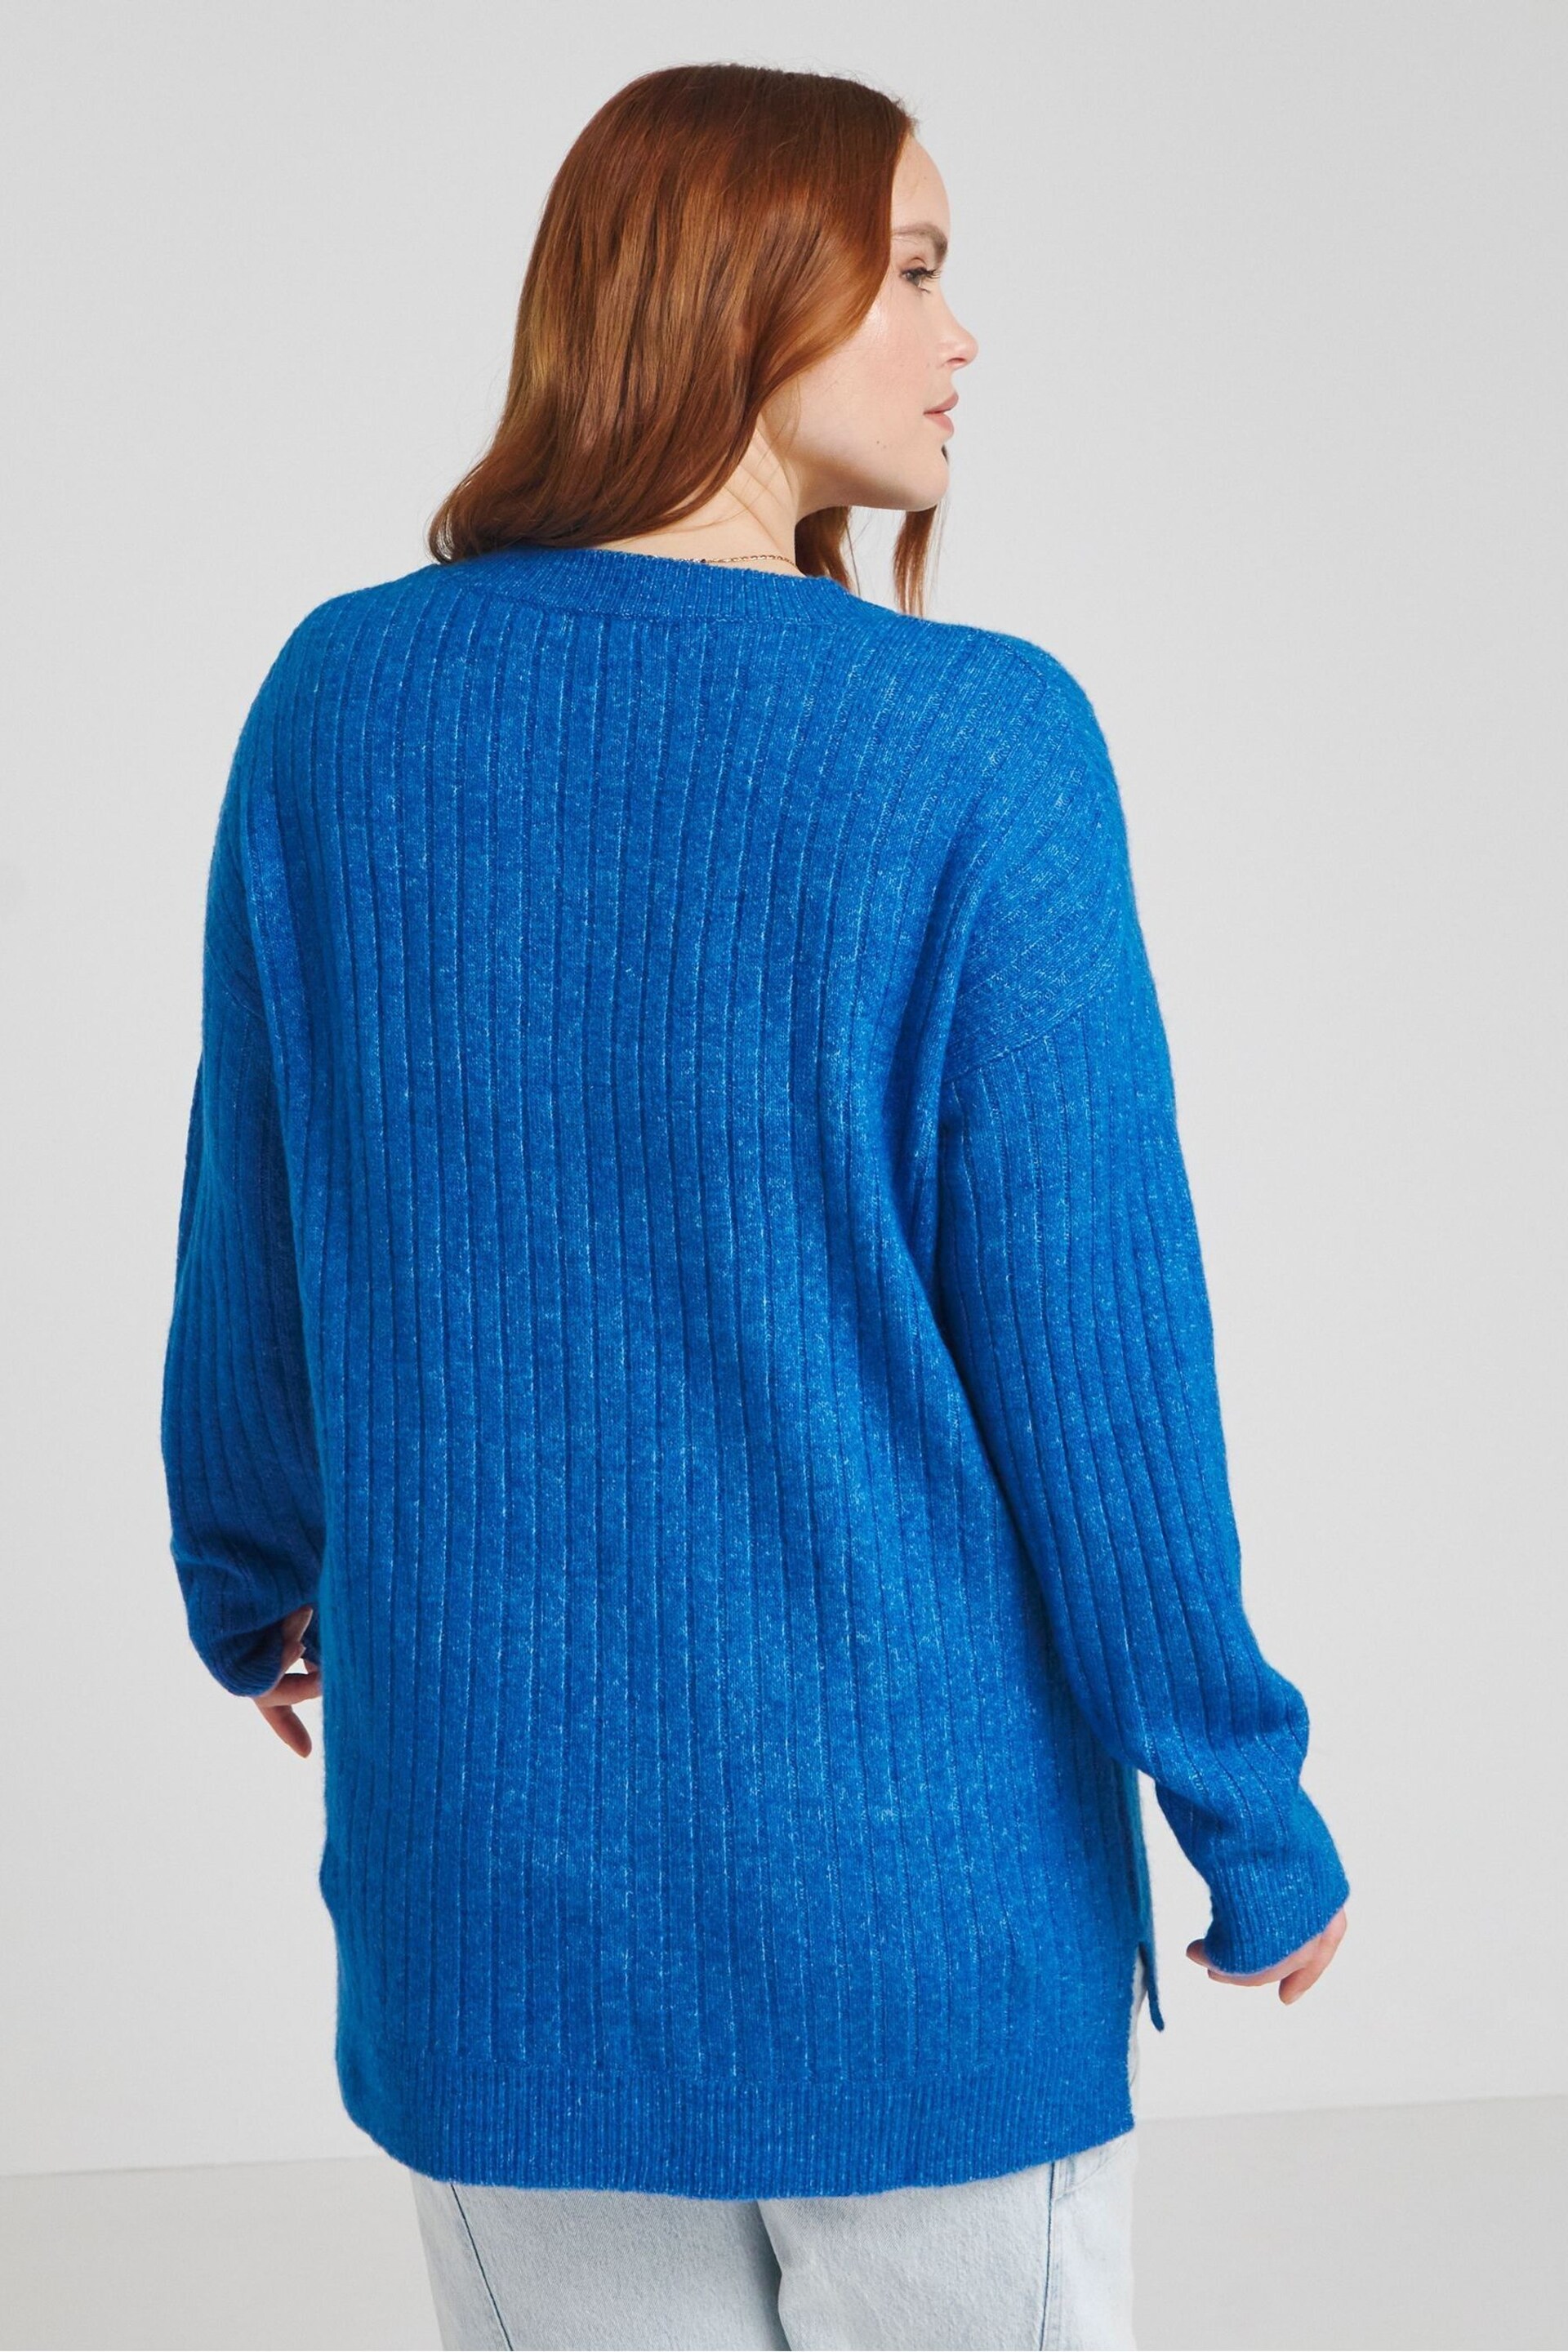 Simply Be Cobalt Blue Sponge Slouchy V Tunic - Image 2 of 4